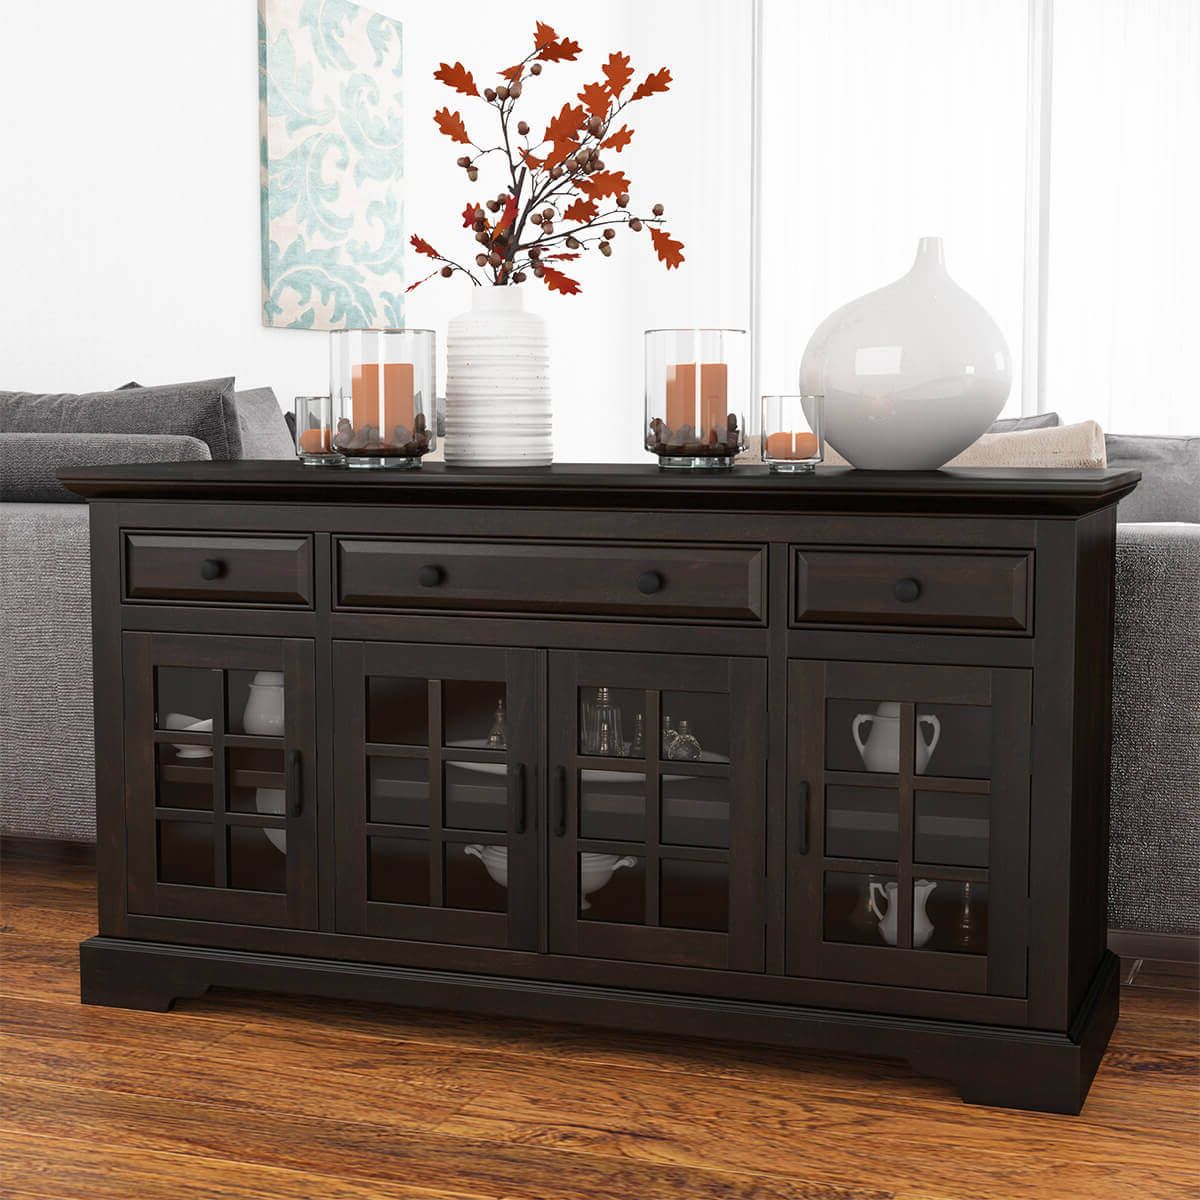 Well Liked Sideboard Storage Cabinet With 3 Drawers & 3 Doors Pertaining To Tirana Rustic Solid Wood Glass Door 3 Drawer Large Sideboard Cabinet (Photo 11 of 15)